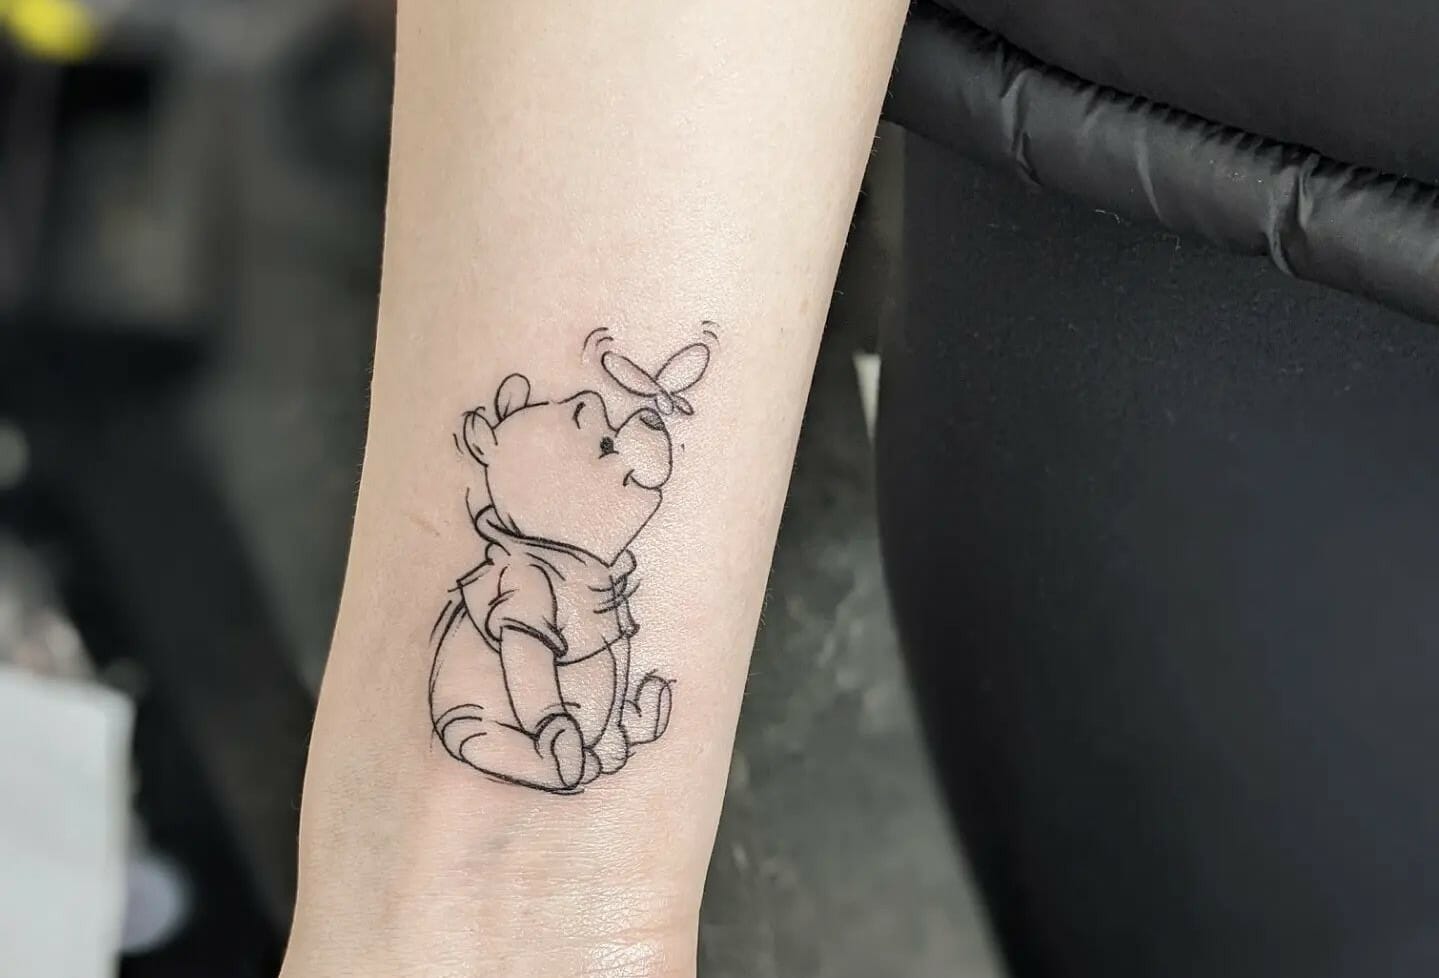 101 Amazing Winnie The Pooh Tattoo Designs You Need To See!